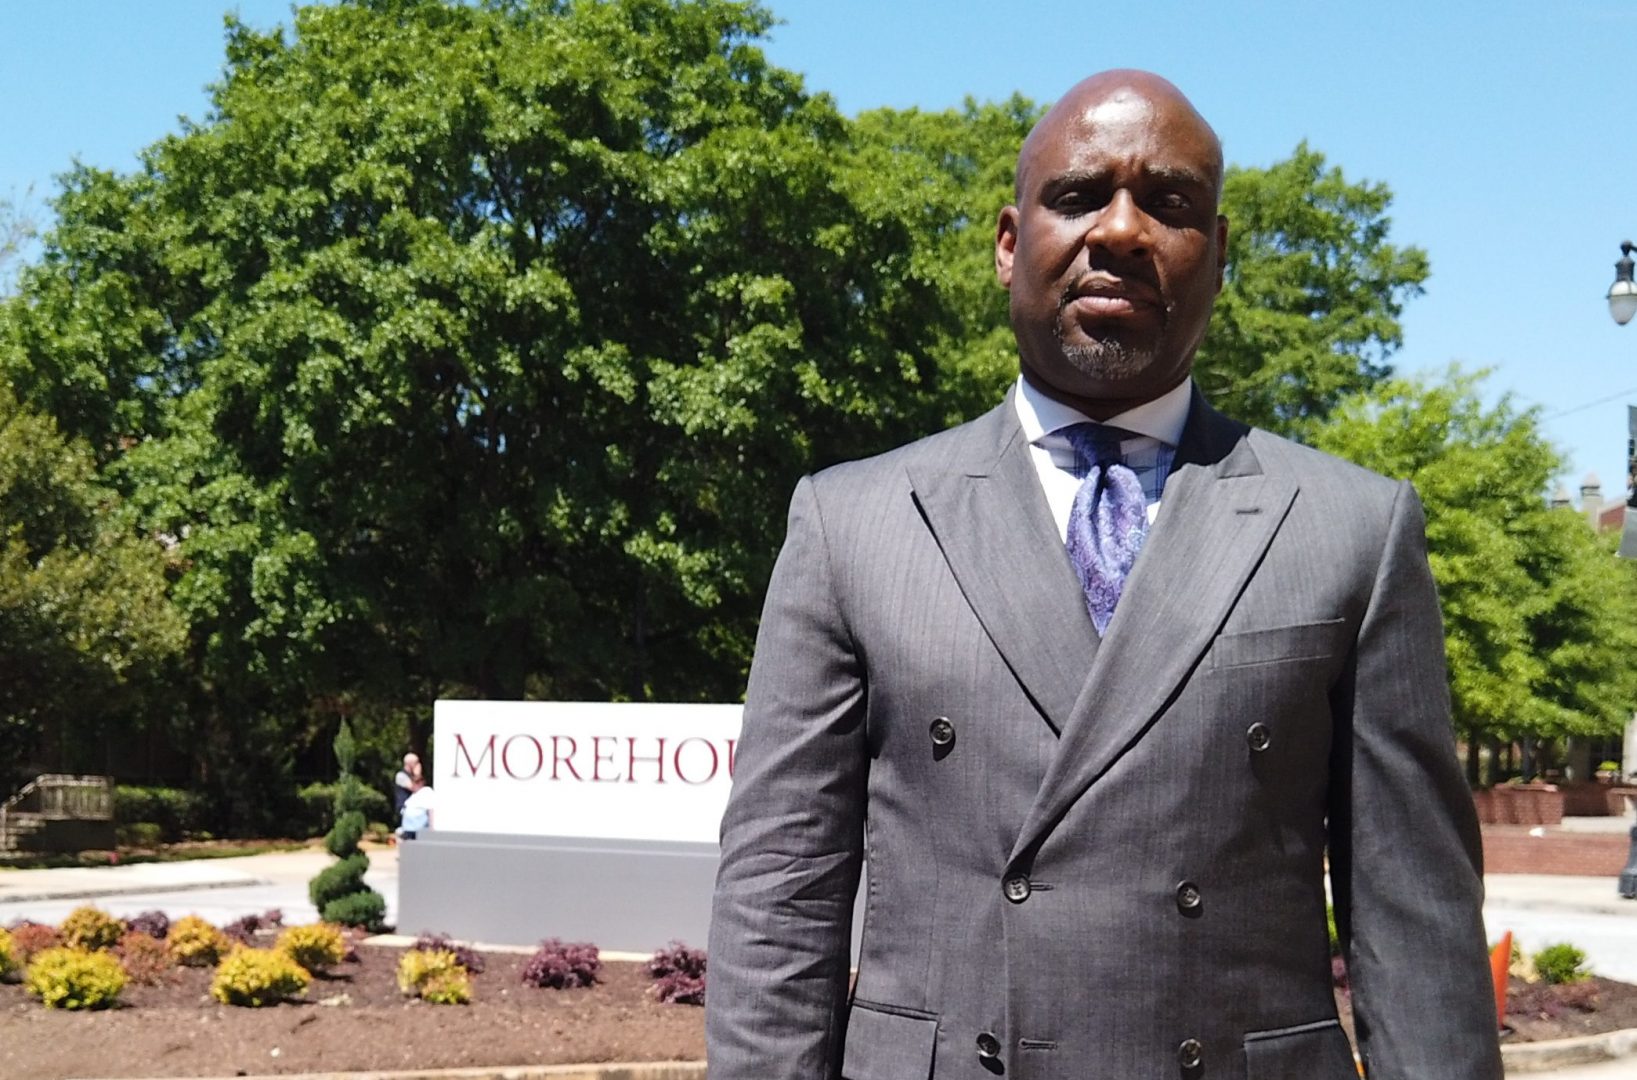 Morehouse rep responds after school adopts gender identity admissions policy